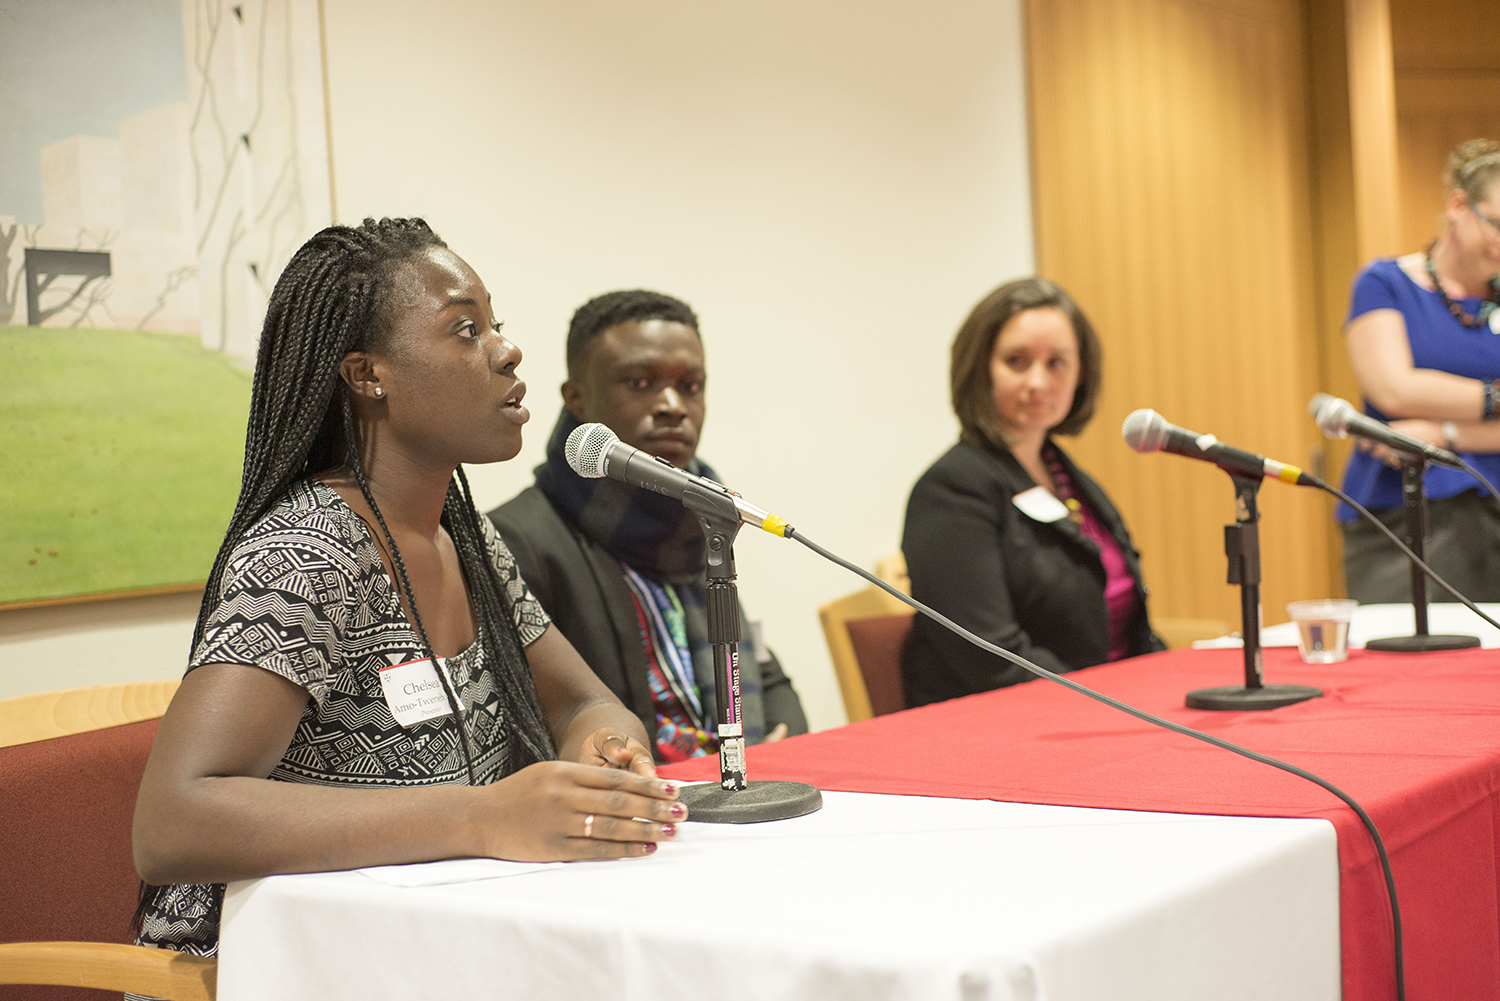 Tiffany Aquino of Unite for Sight; Shadrack Frimpong of Healthy Africa; and Chelsea Tweneboah '15 of Cape Coast Regional Hospital in Ghana participated in a healthcare panel. The talk was moderated by Laura Ann Twagira, assistant professor of history. 